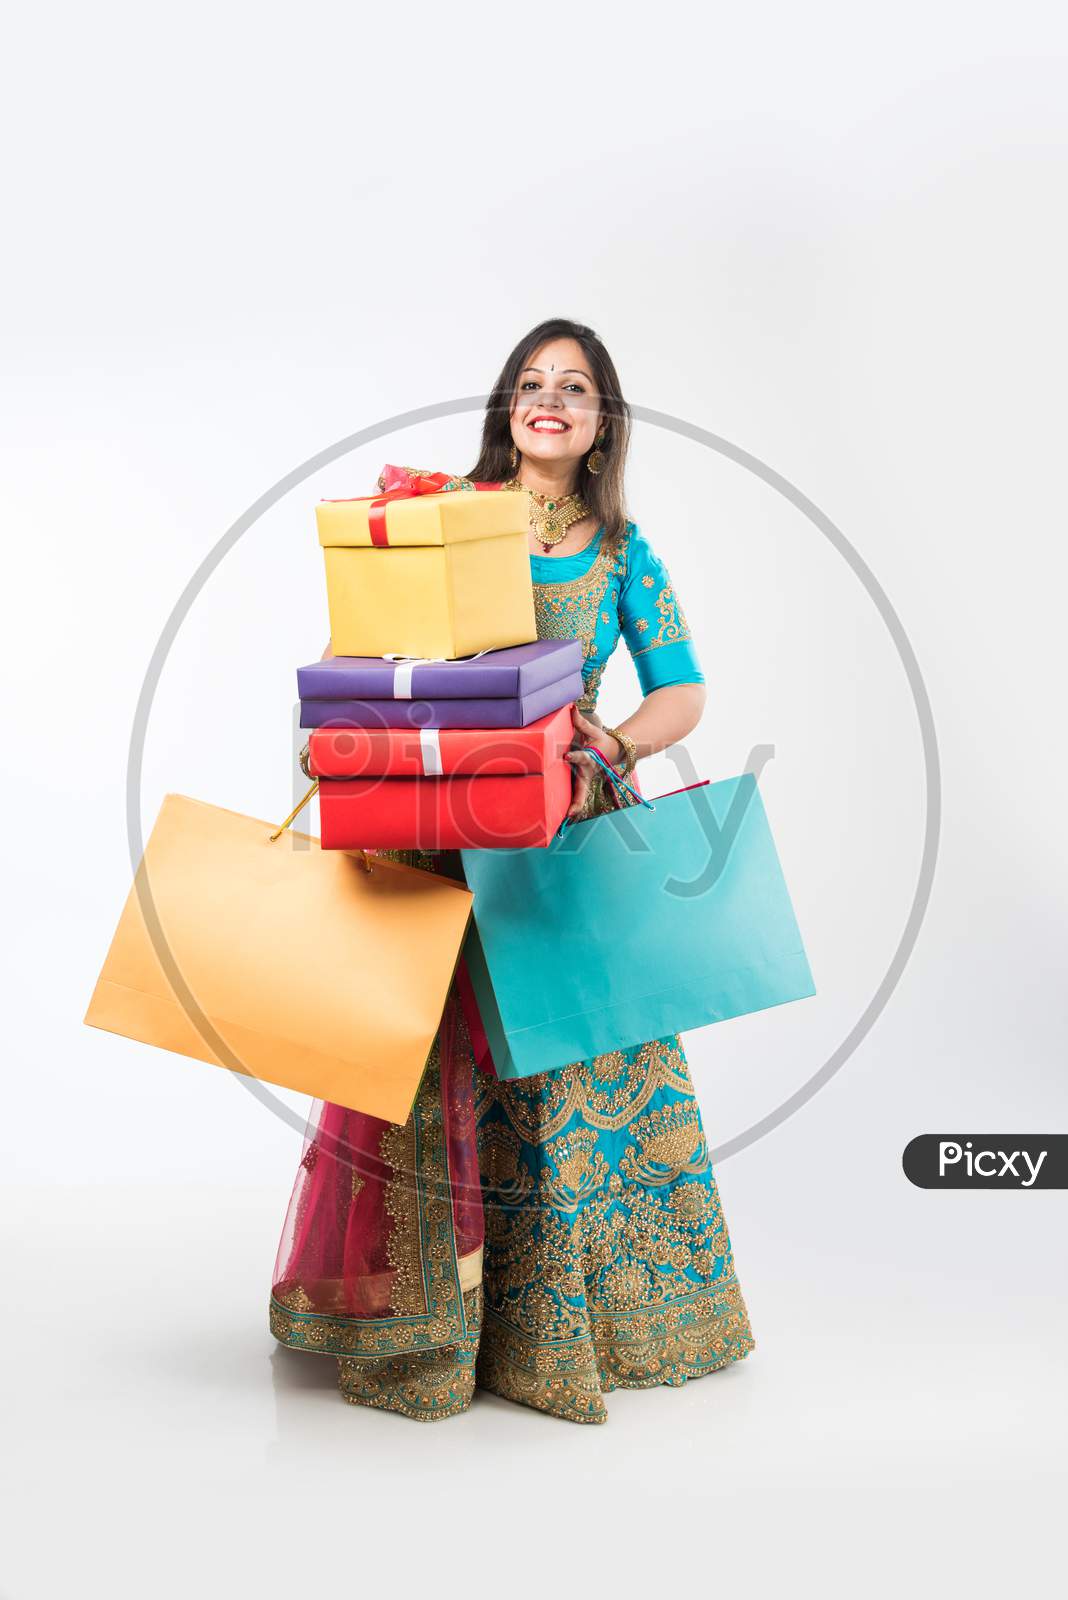 Indian girl with Shopping bags and gift boxes, standing isolated over white background